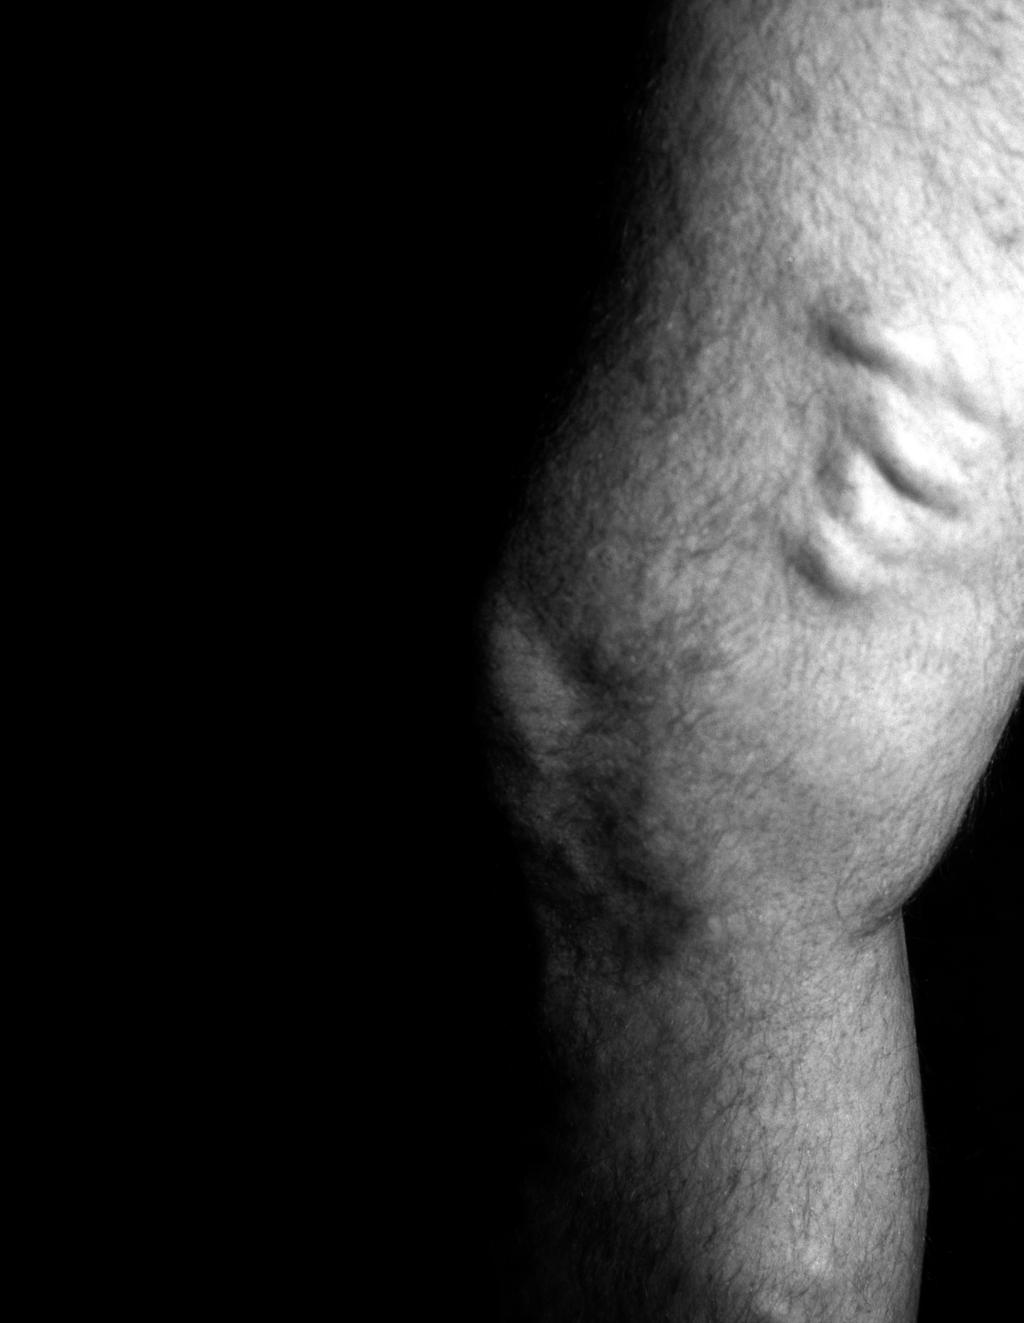 Varicose Veins Painful and unsightly varicose veins can be treated on a outpatient basis with a minimally invasive procedure called ablation.